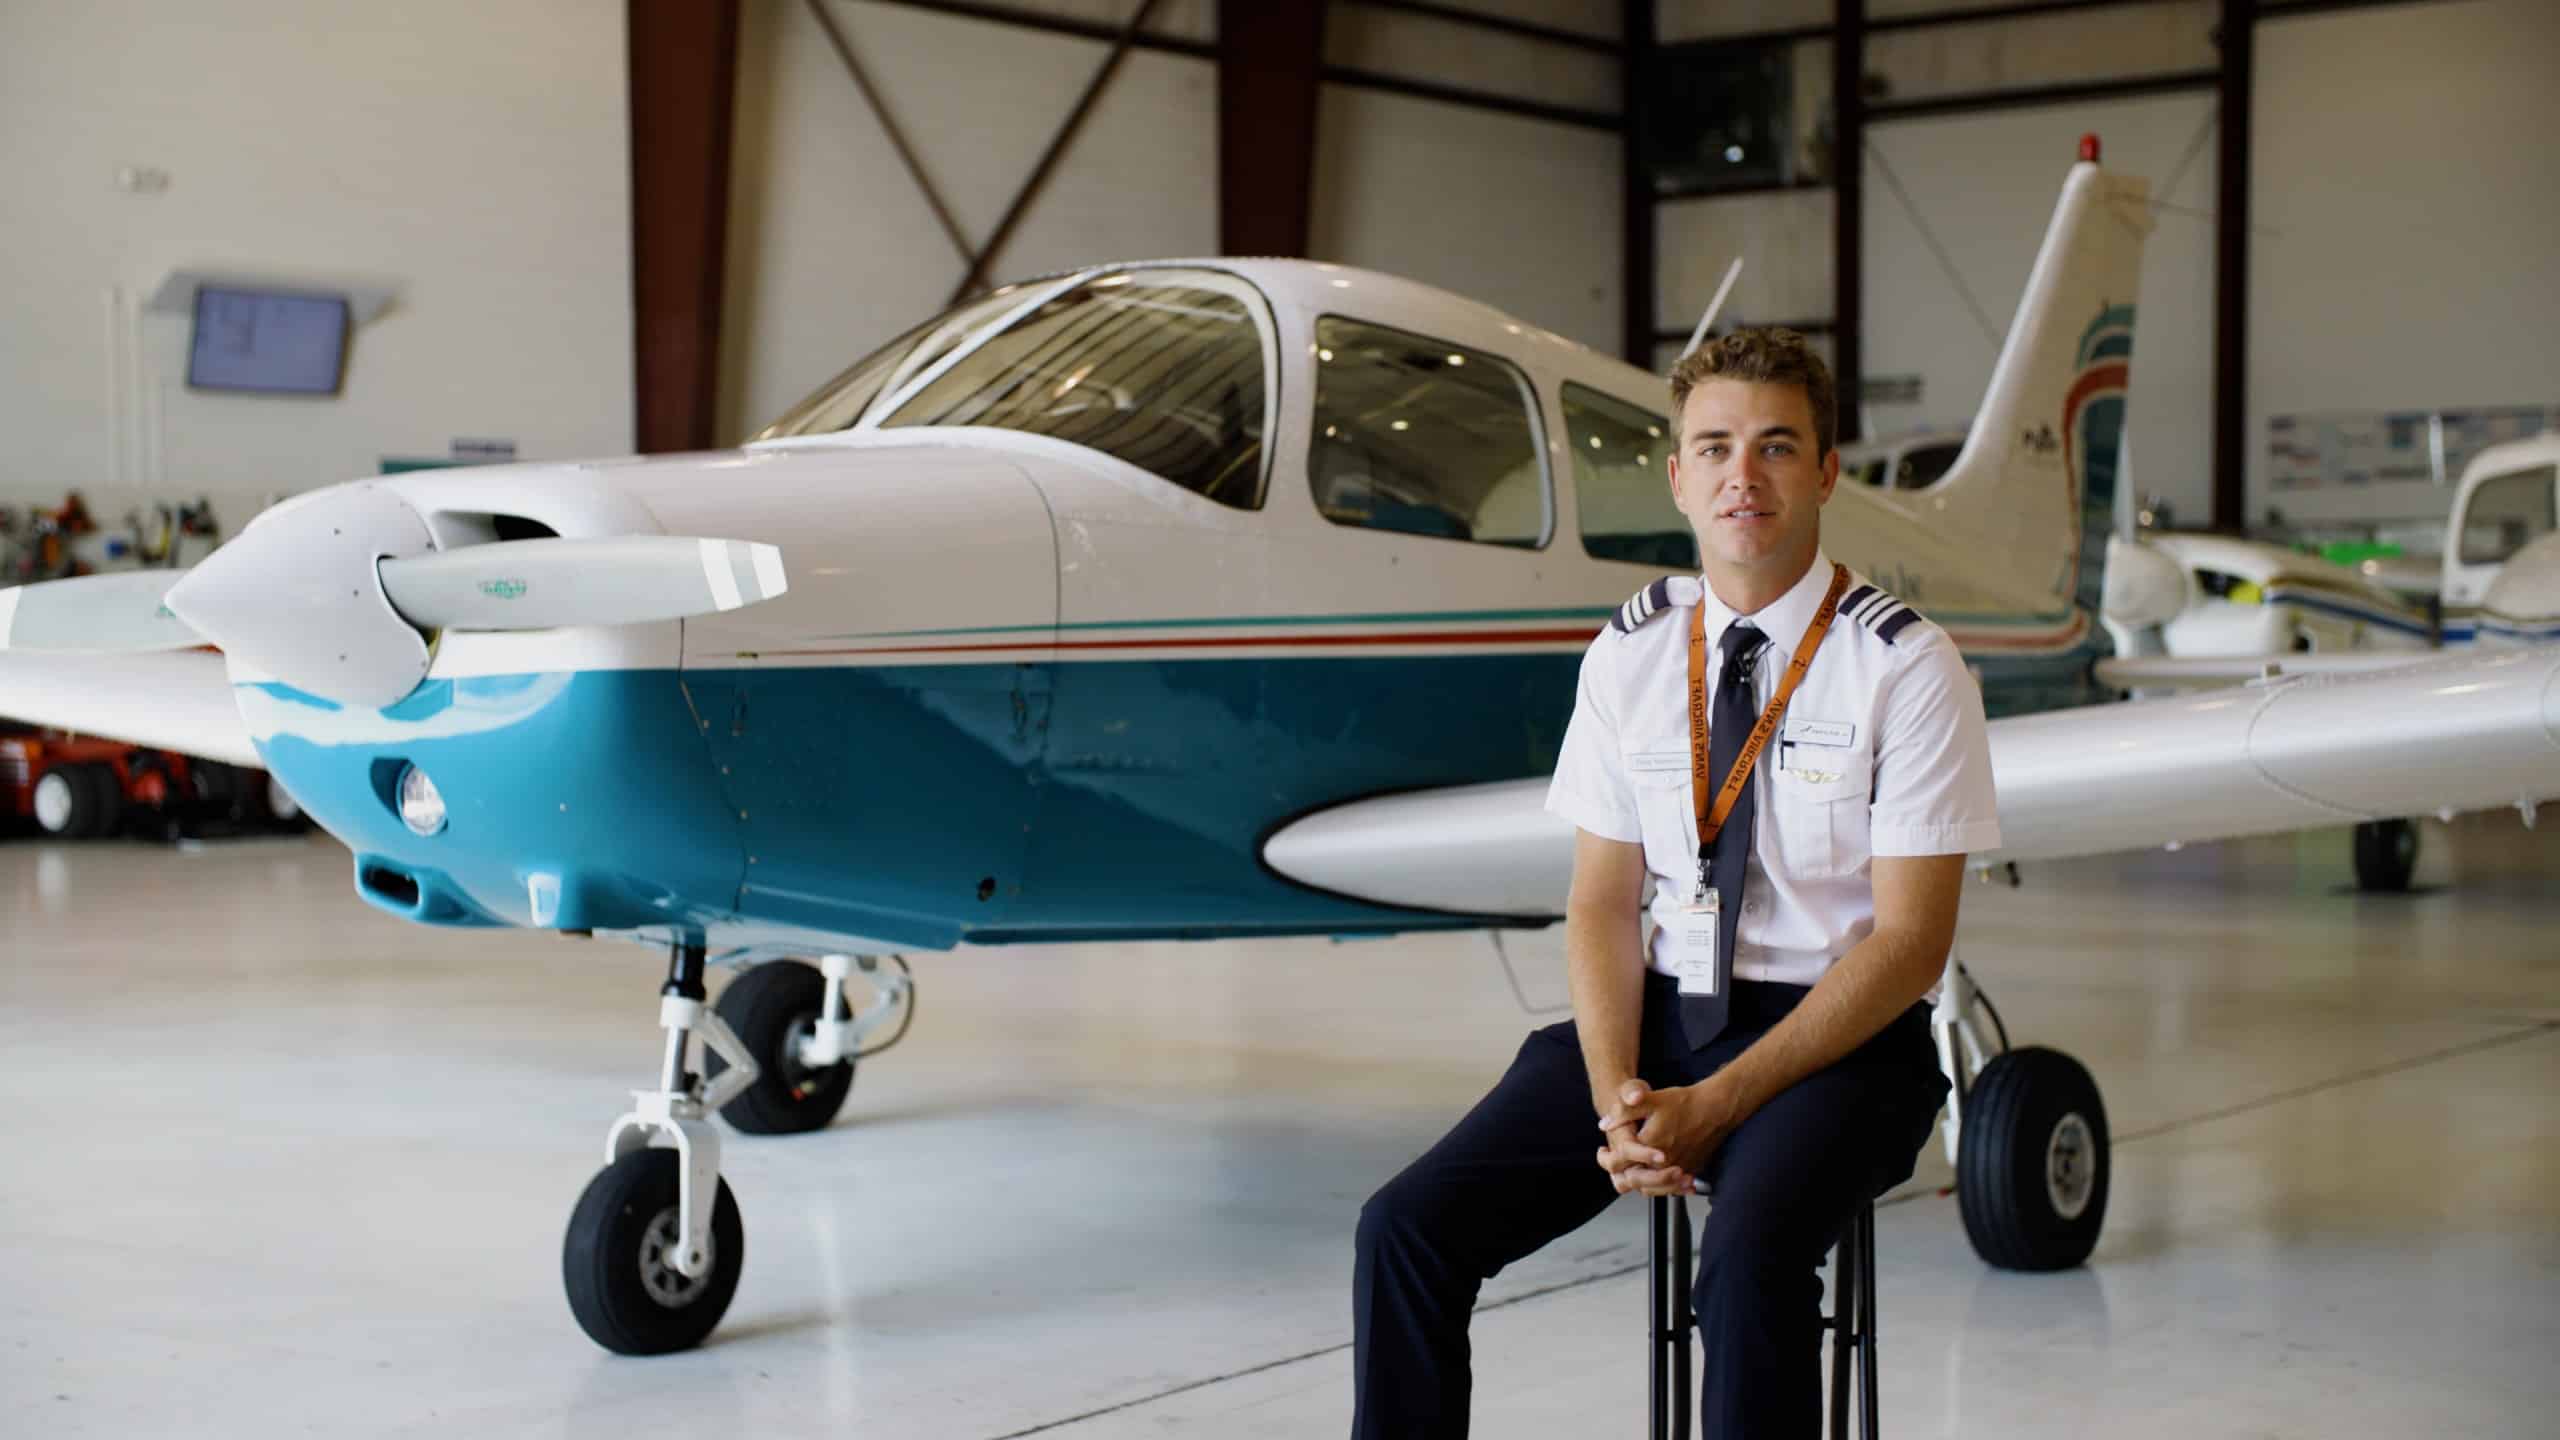 A Paris Air instructor sitting in front of a small airplane, looking at the camera